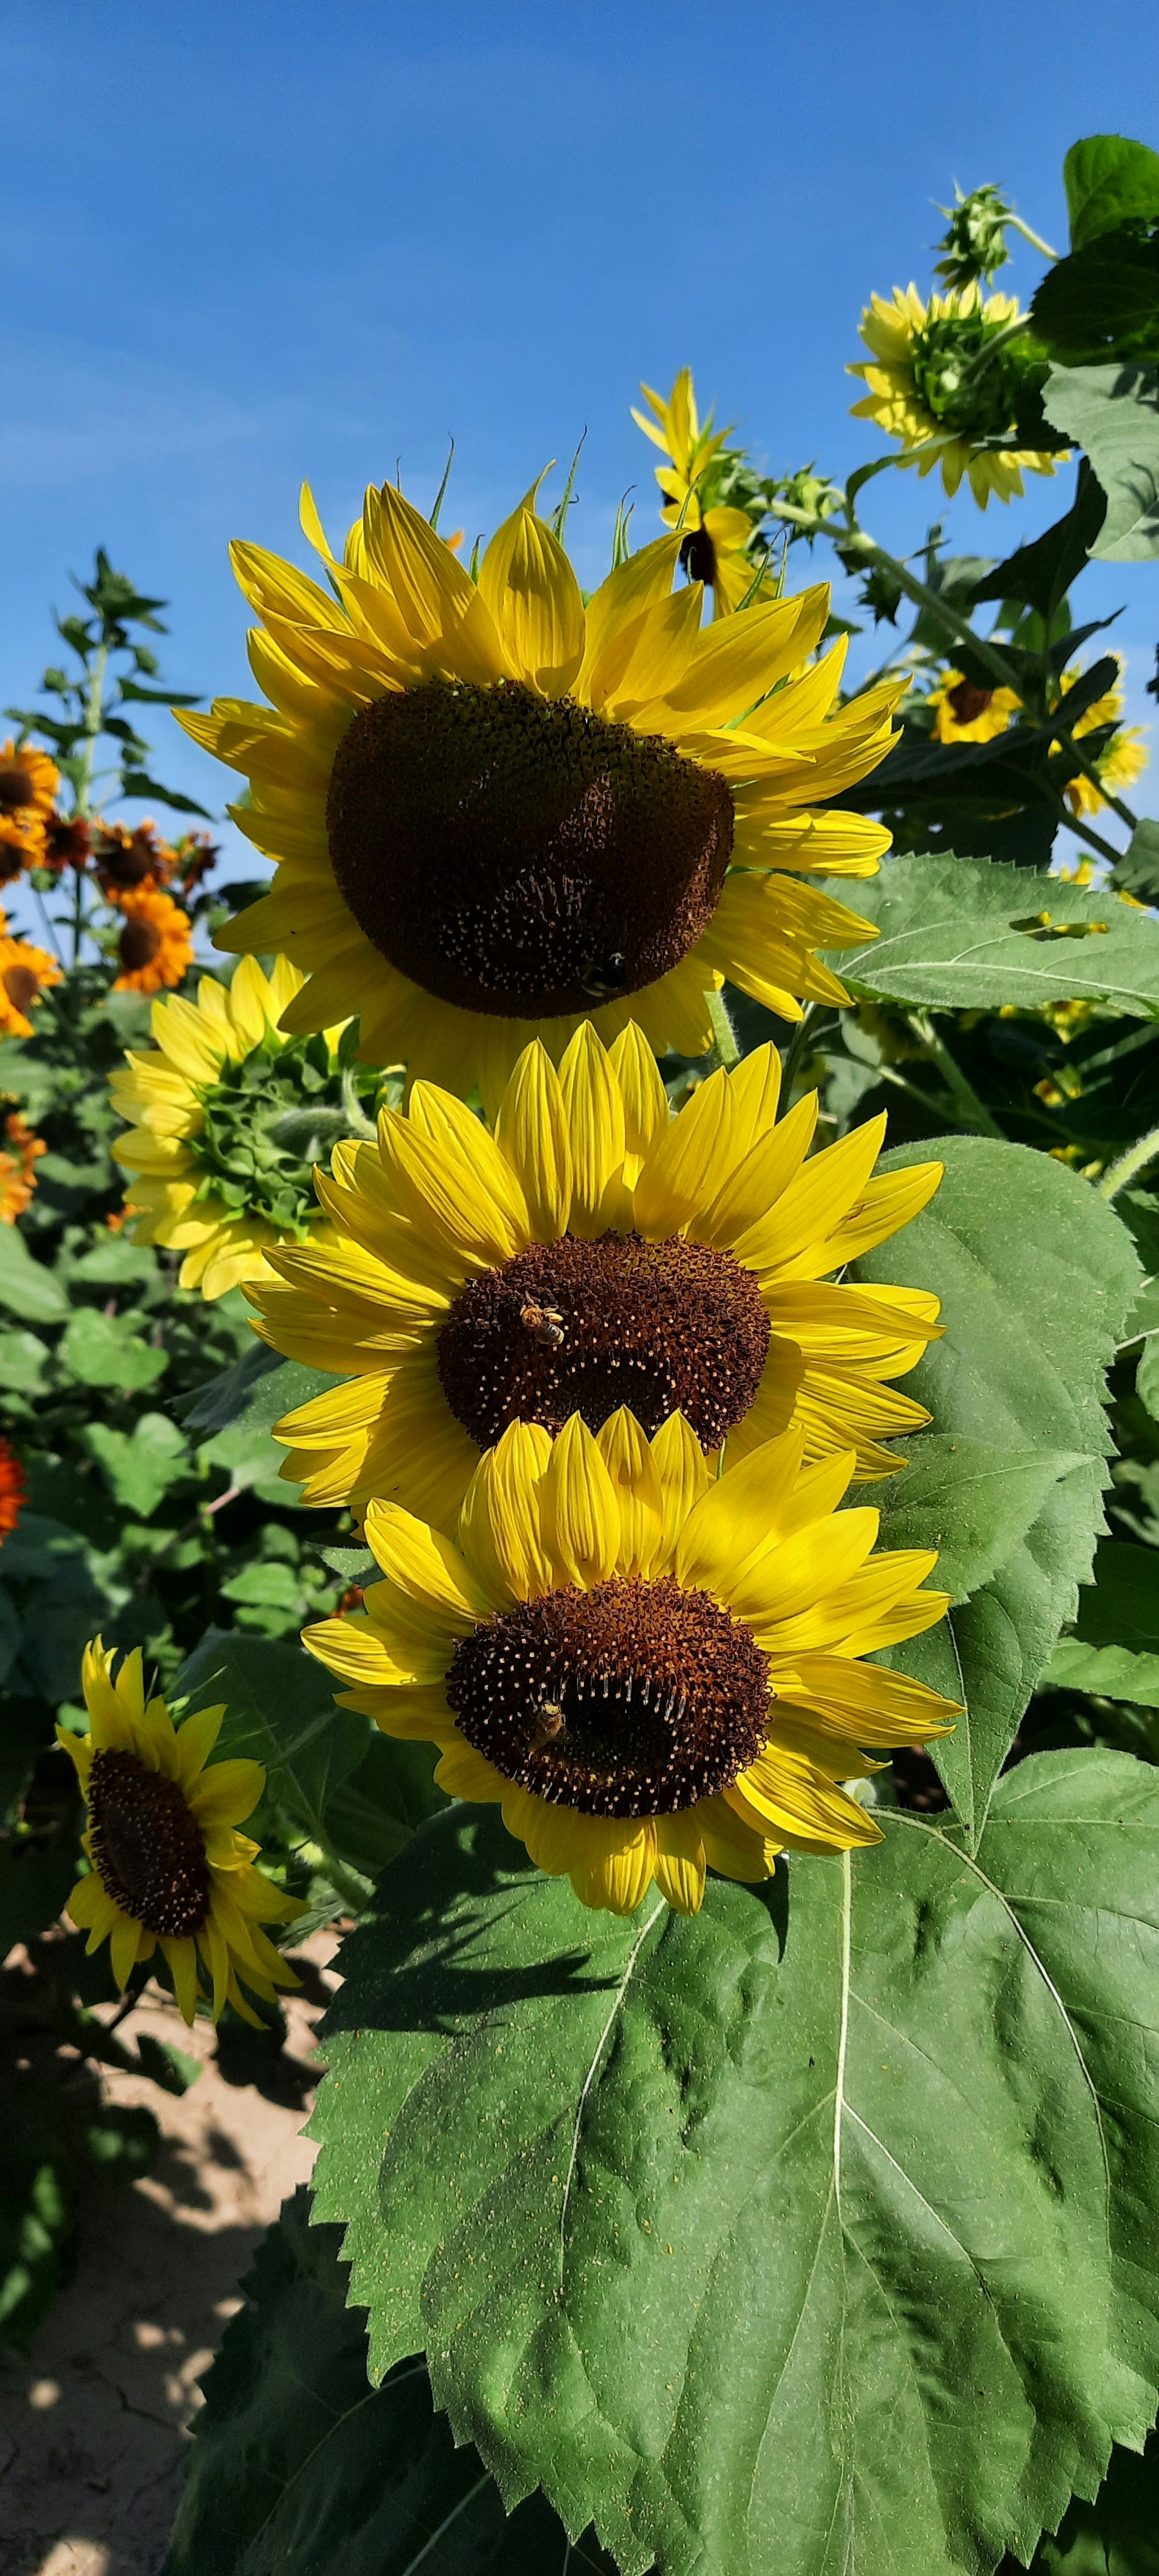 Three drooping sunflowers 🌻. It's hard work looking this beautiful. 🙂